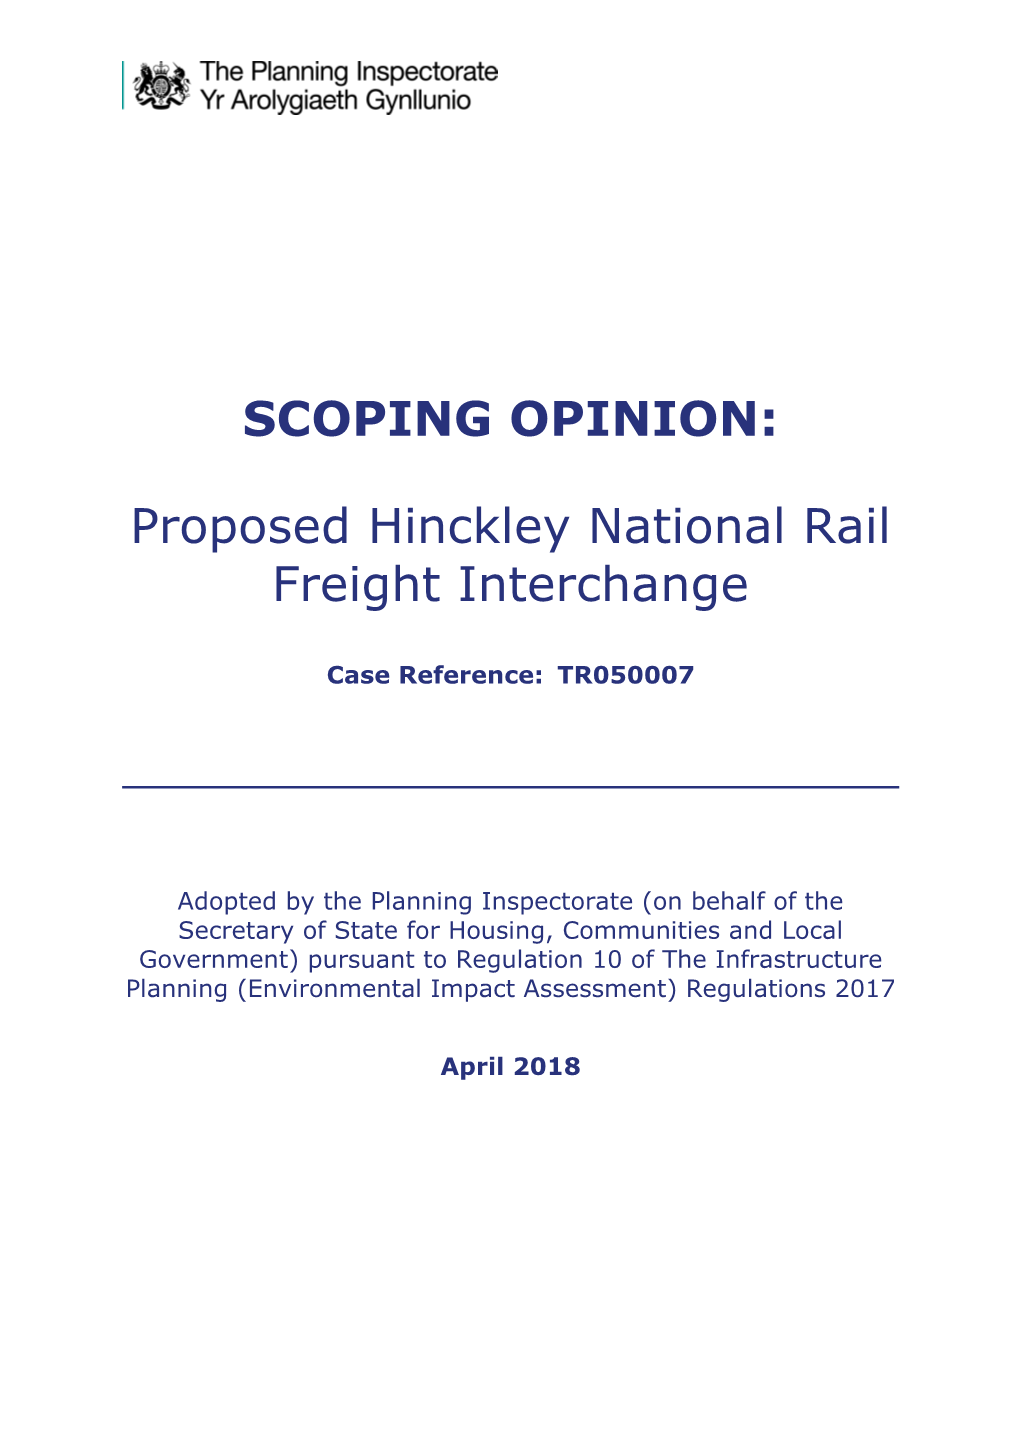 SCOPING OPINION: Proposed Hinckley National Rail Freight